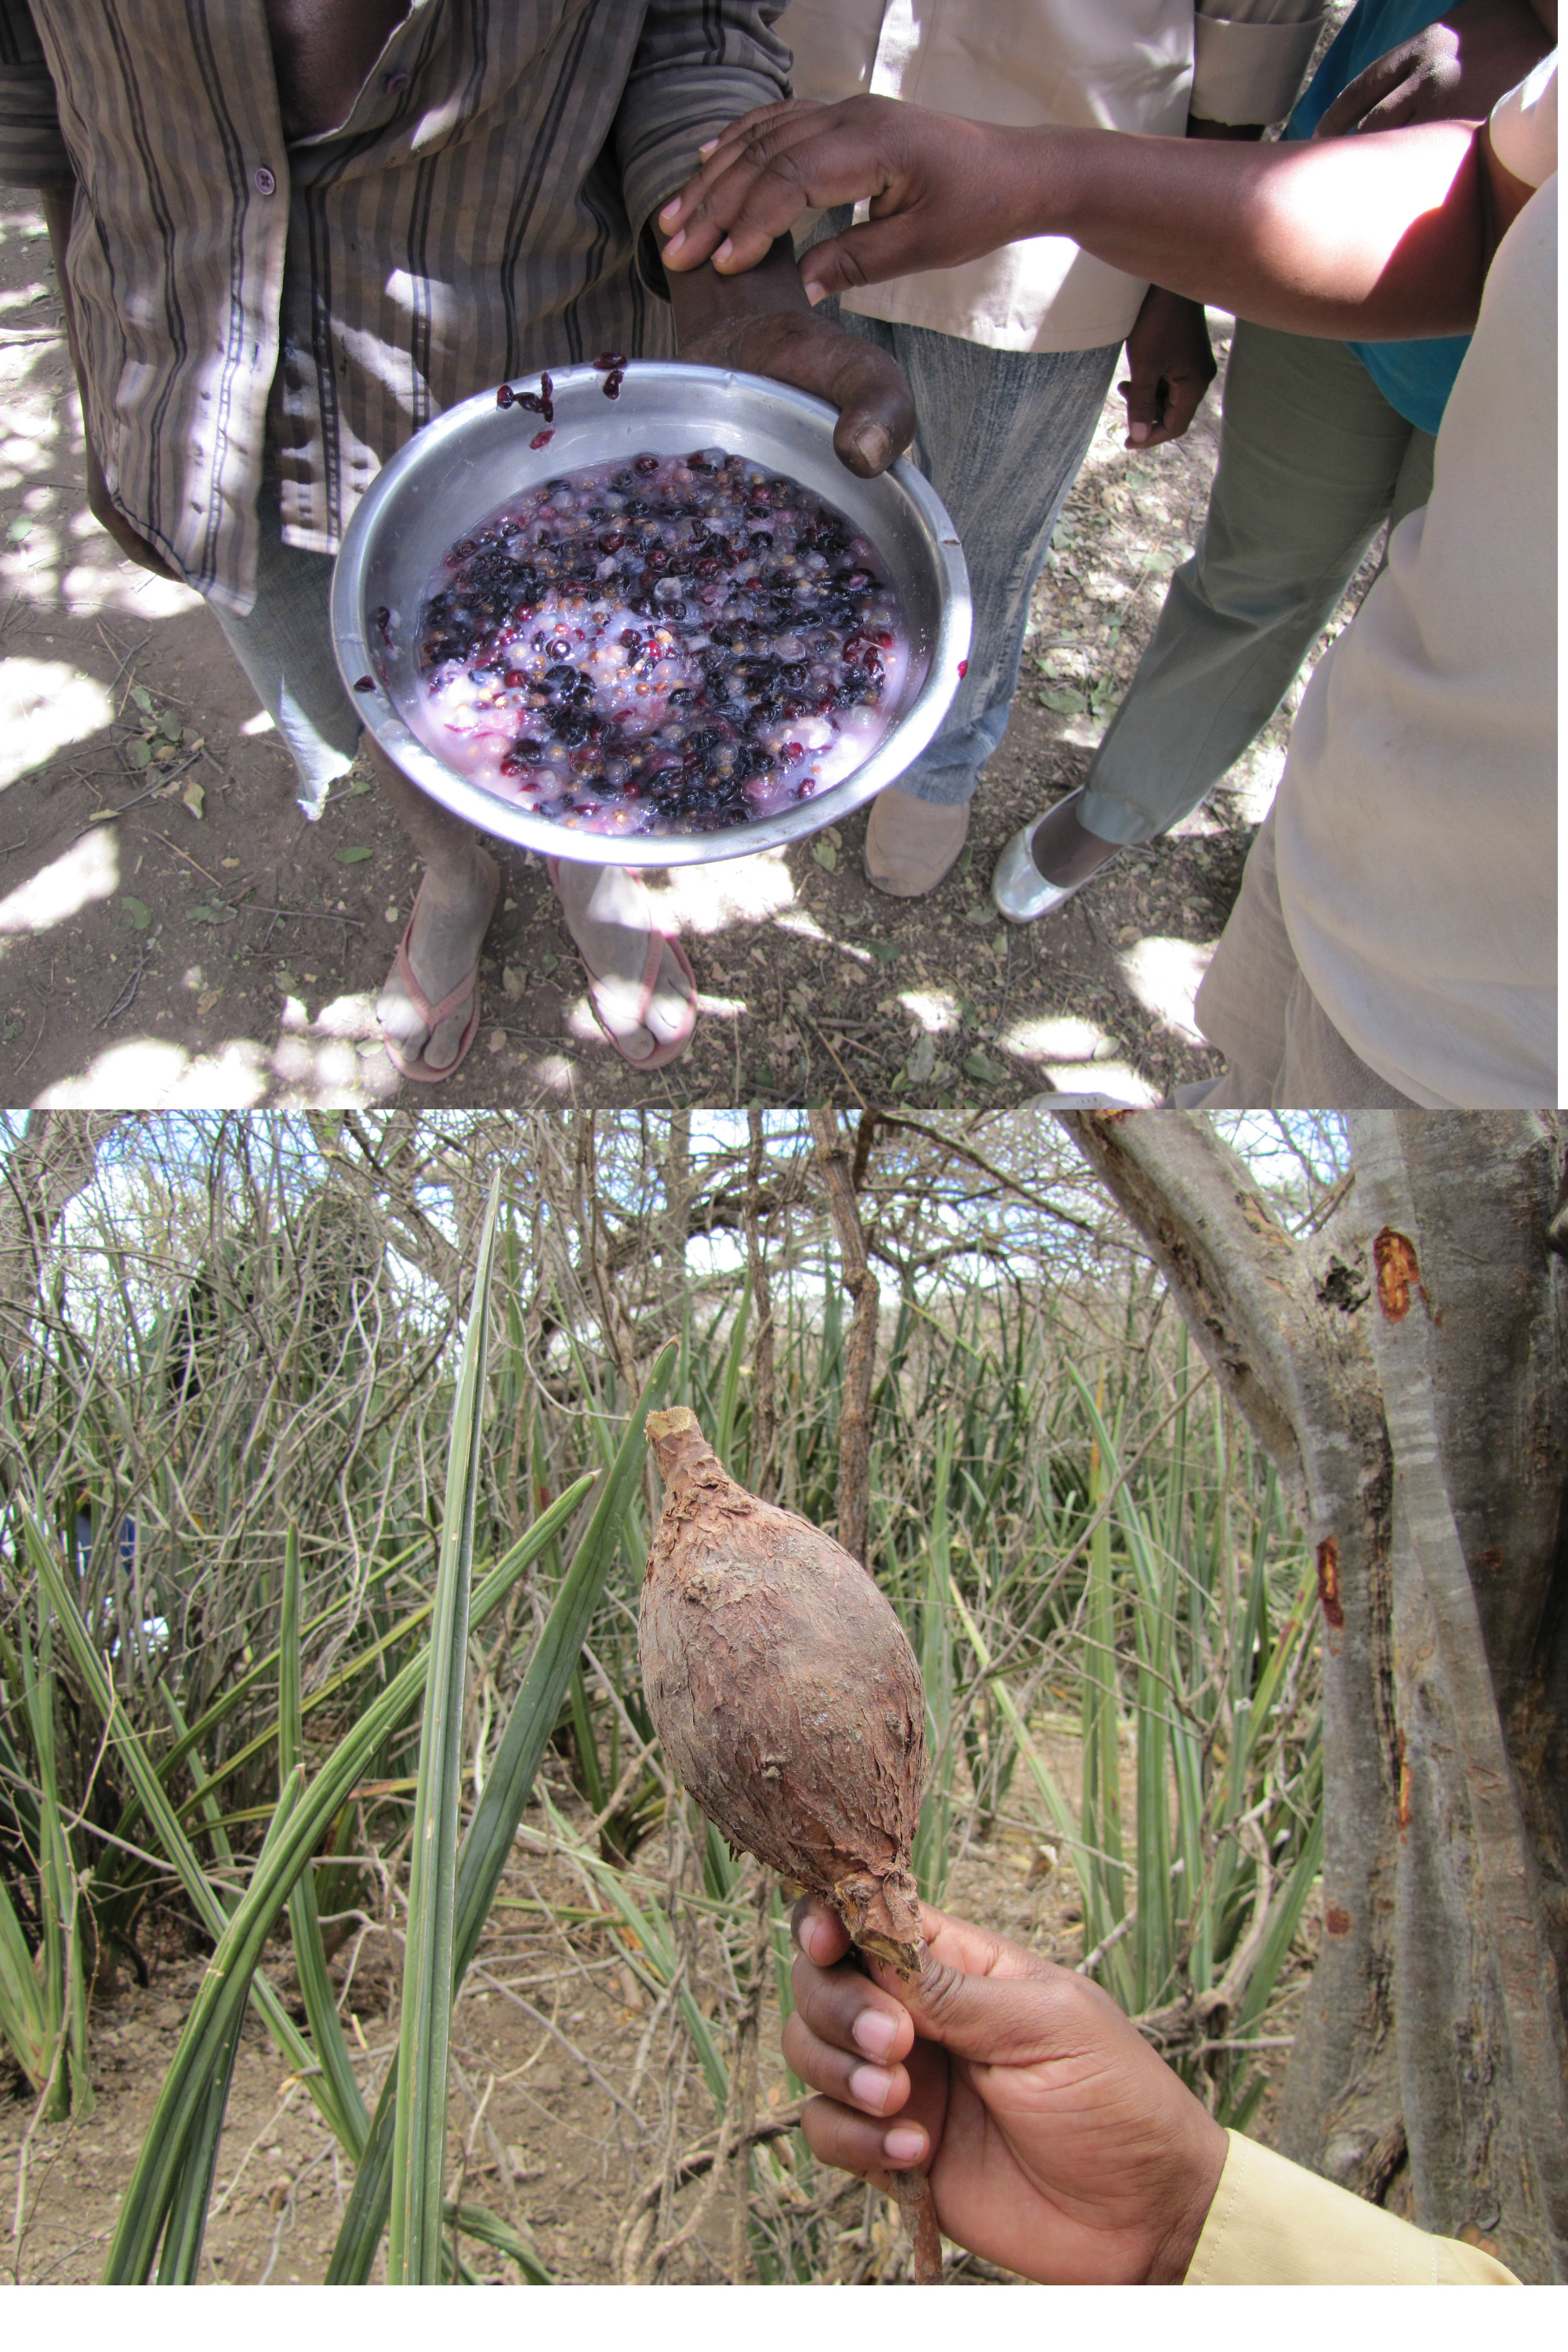 two images, top one shows dark purple berries, bottom shows person's hand holding tuber.